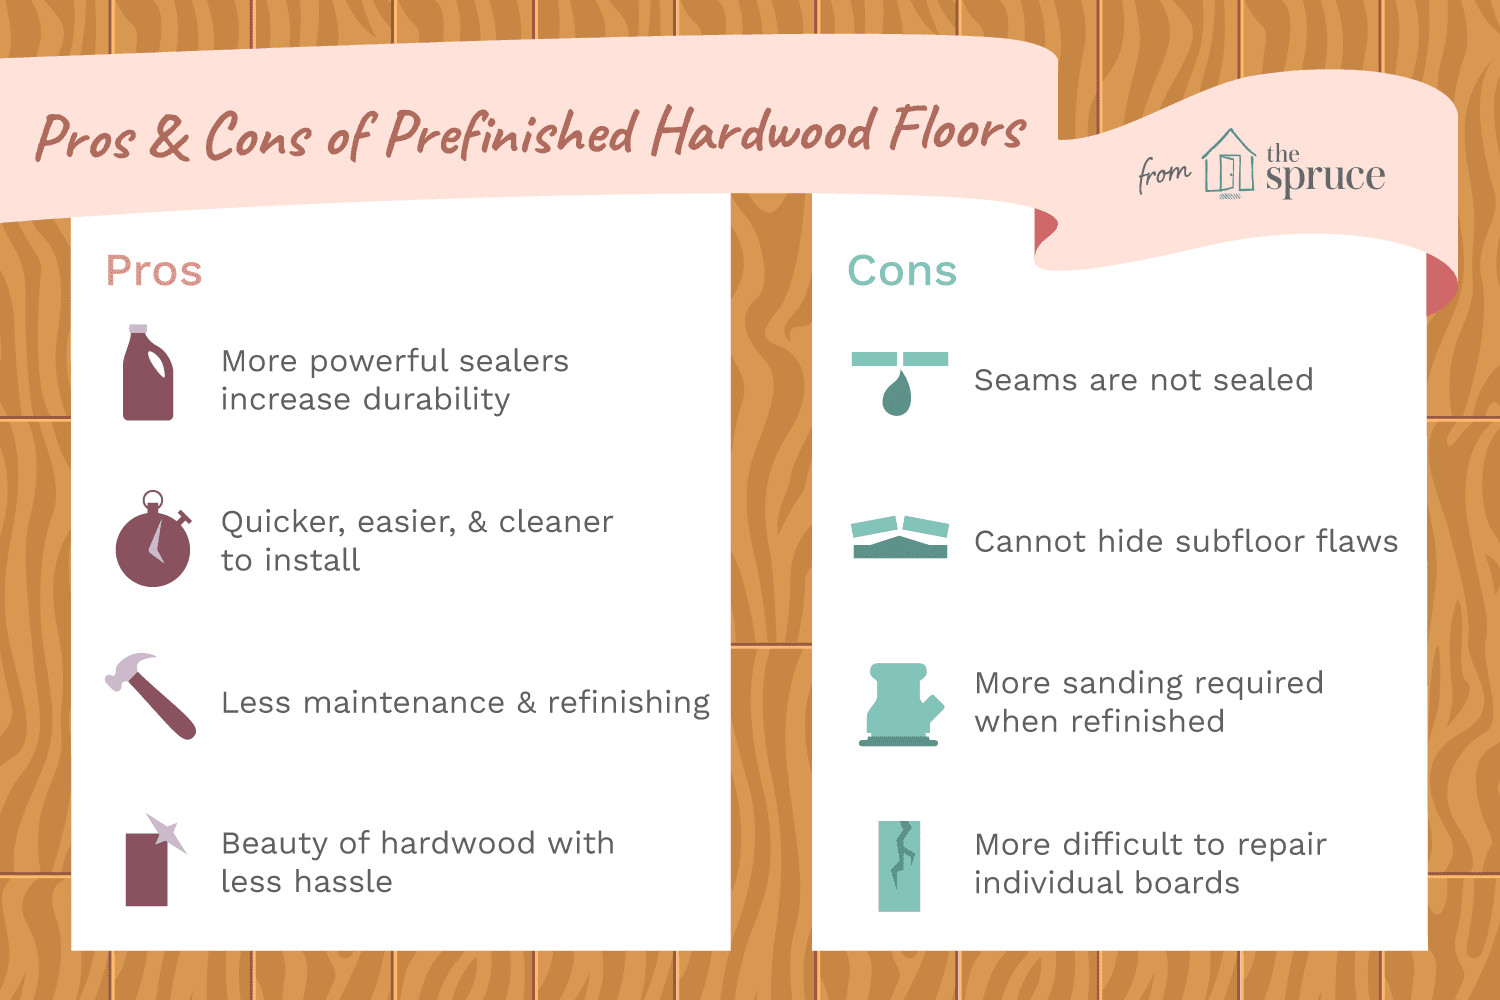 hardwood floor manufacturers ratings of the pros and cons of prefinished hardwood flooring with regard to prefinished hardwood floors